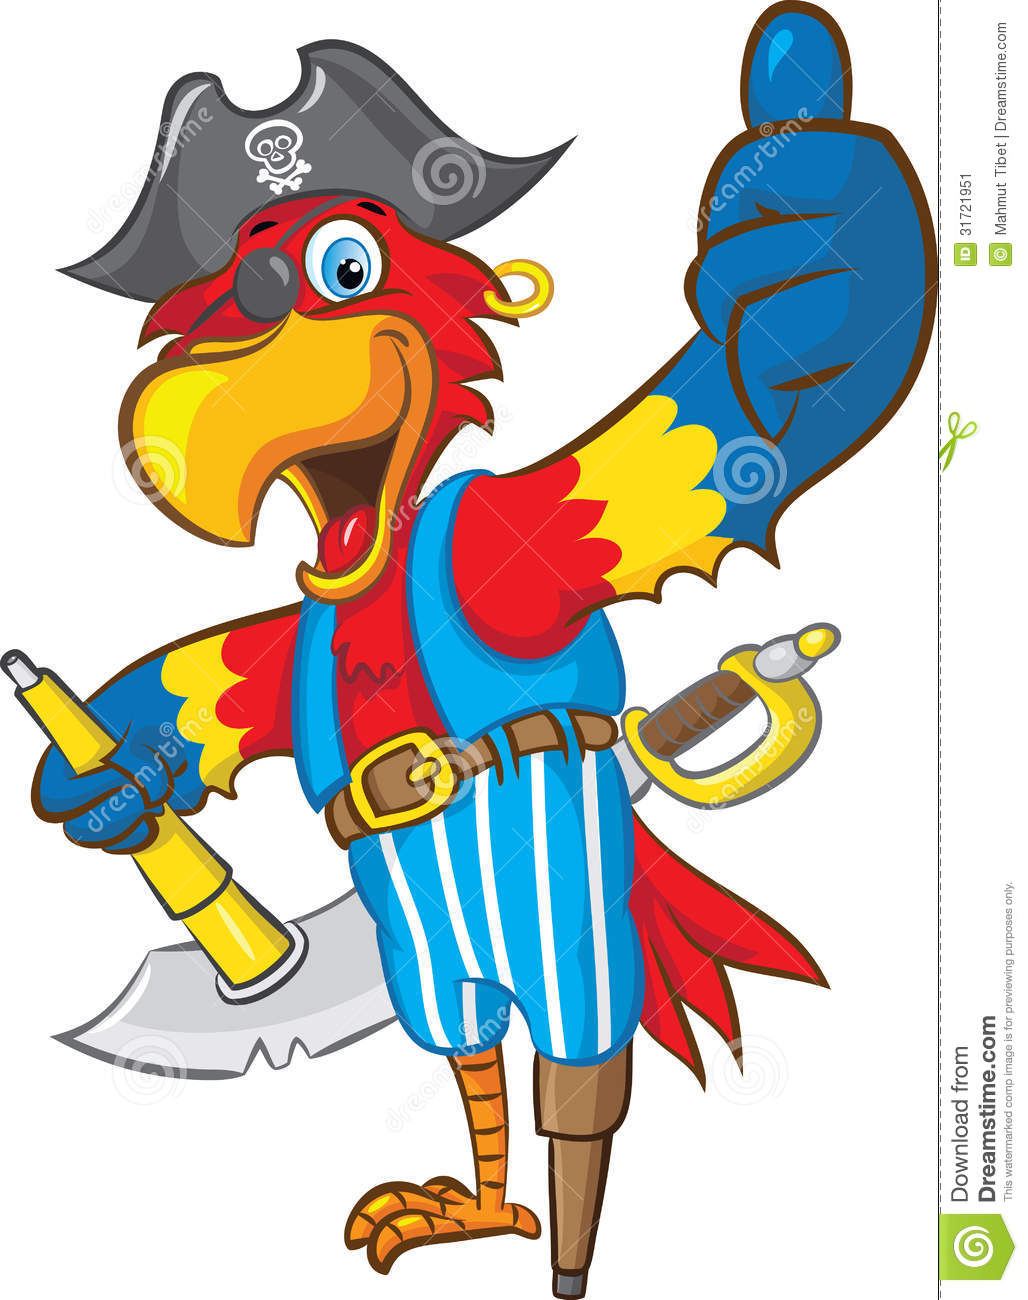 Pirate Parrot Stock Image   Image  31721951